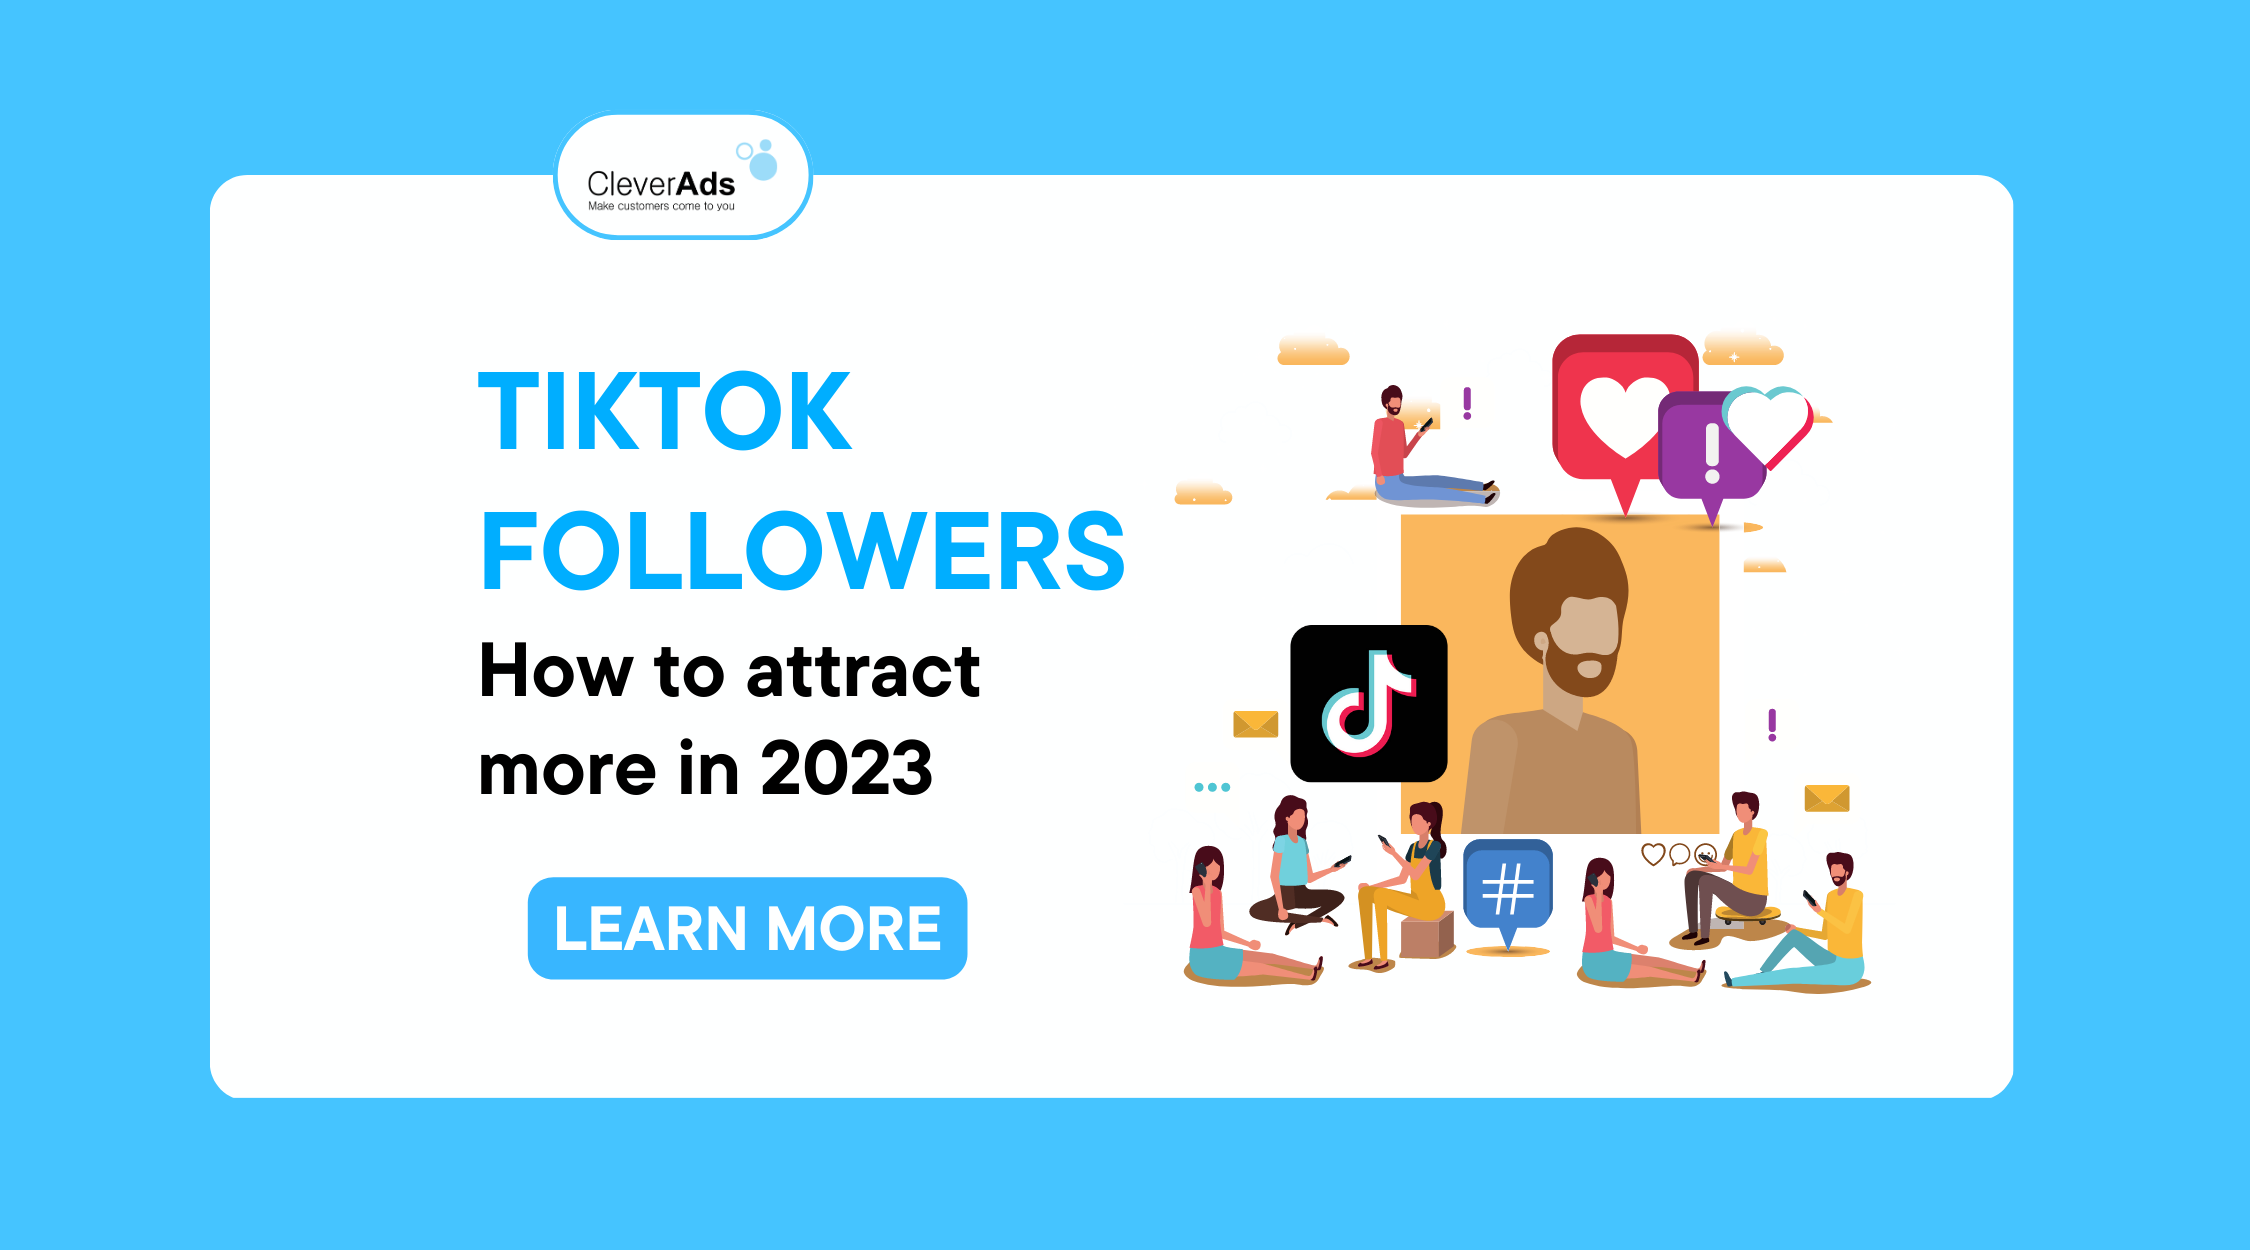 TikTok followers: How to attract more in 2023